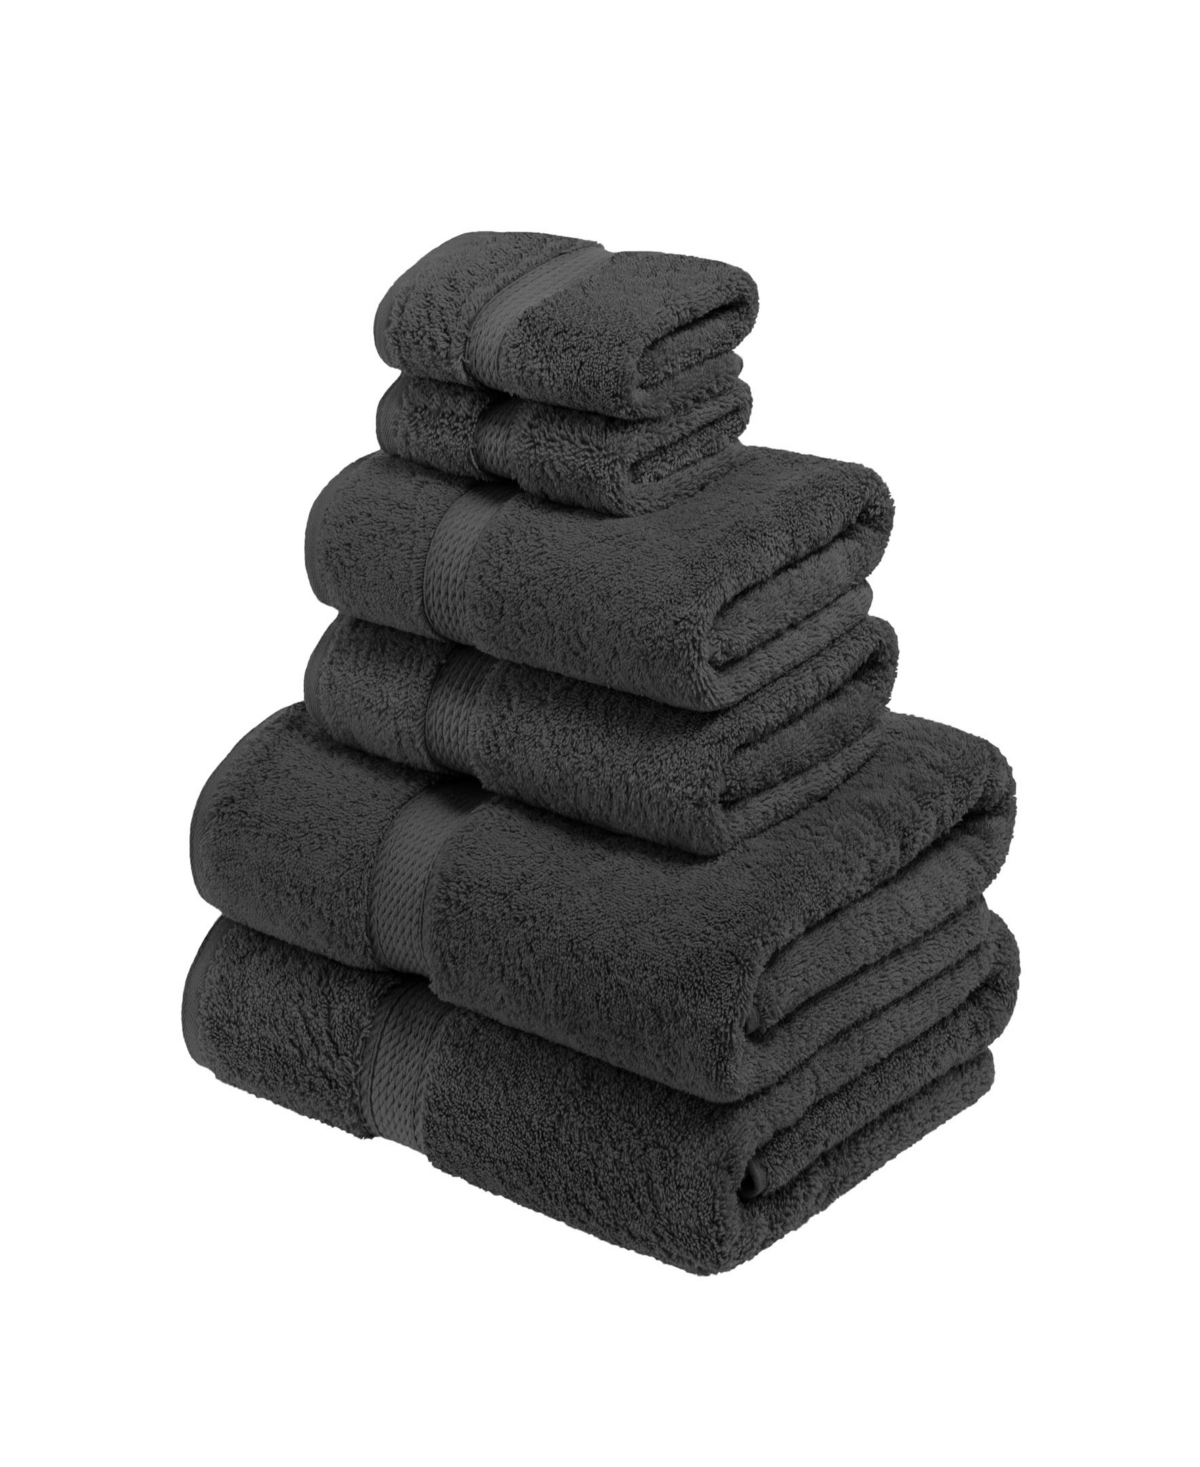 Superior Highly Absorbent 6 Piece Egyptian Cotton Ultra Plush Solid Assorted Bath Towel Set Bedding In Charcoal